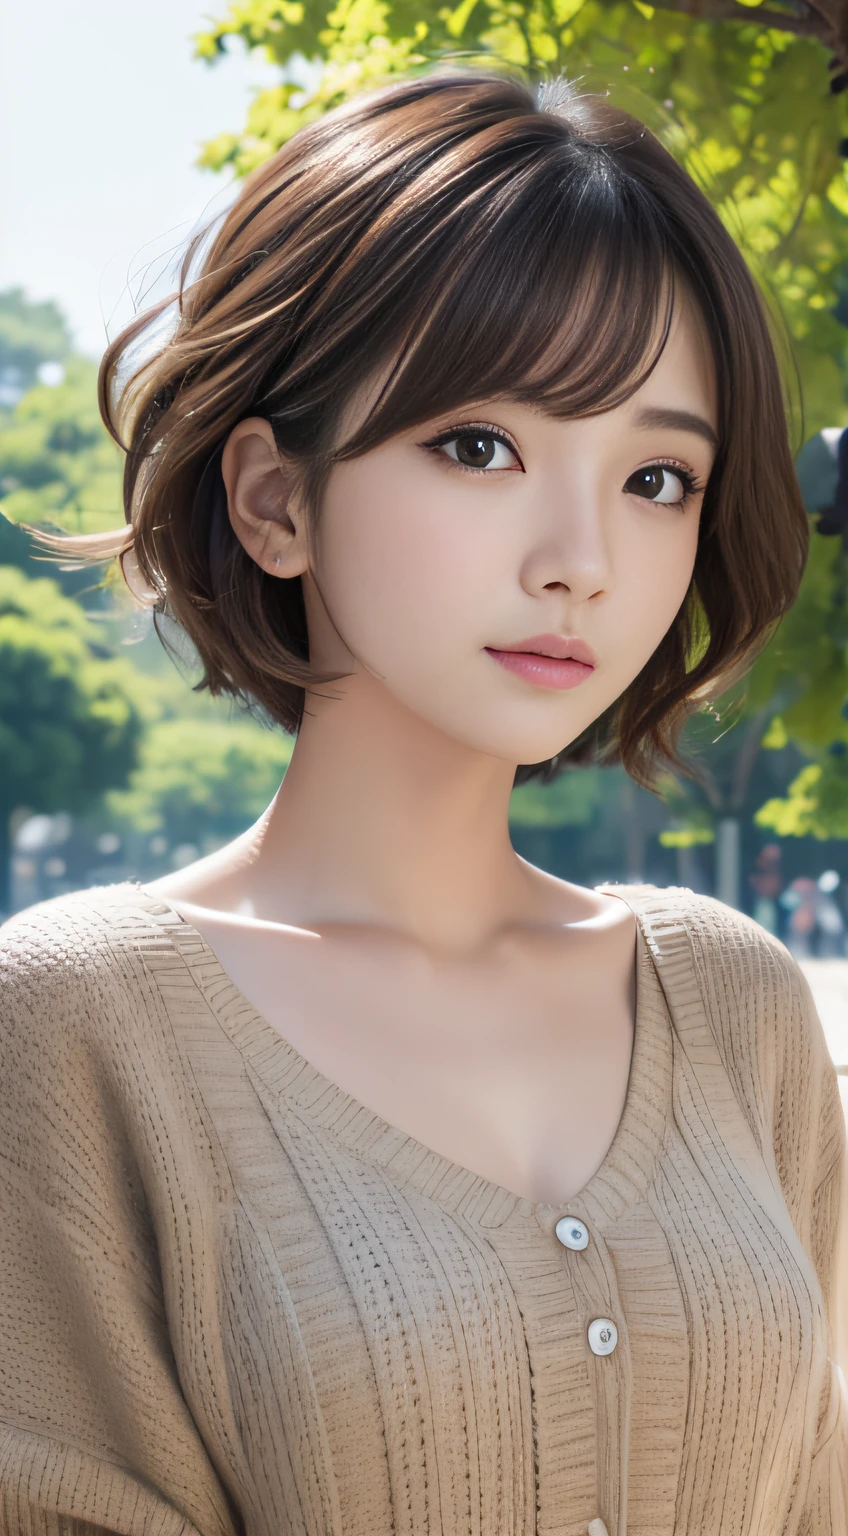 masutepiece, Best Quality, Illustration, Ultra-detailed, finely detail, hight resolution, 8K Wallpaper, Perfect dynamic composition、27 year old cute girl、detailed beautiful faces、detailed cute eyes、Textured skin、Faintly open lips、Wavy brown short-cut hair、Sexy shot looking at camera、a park、